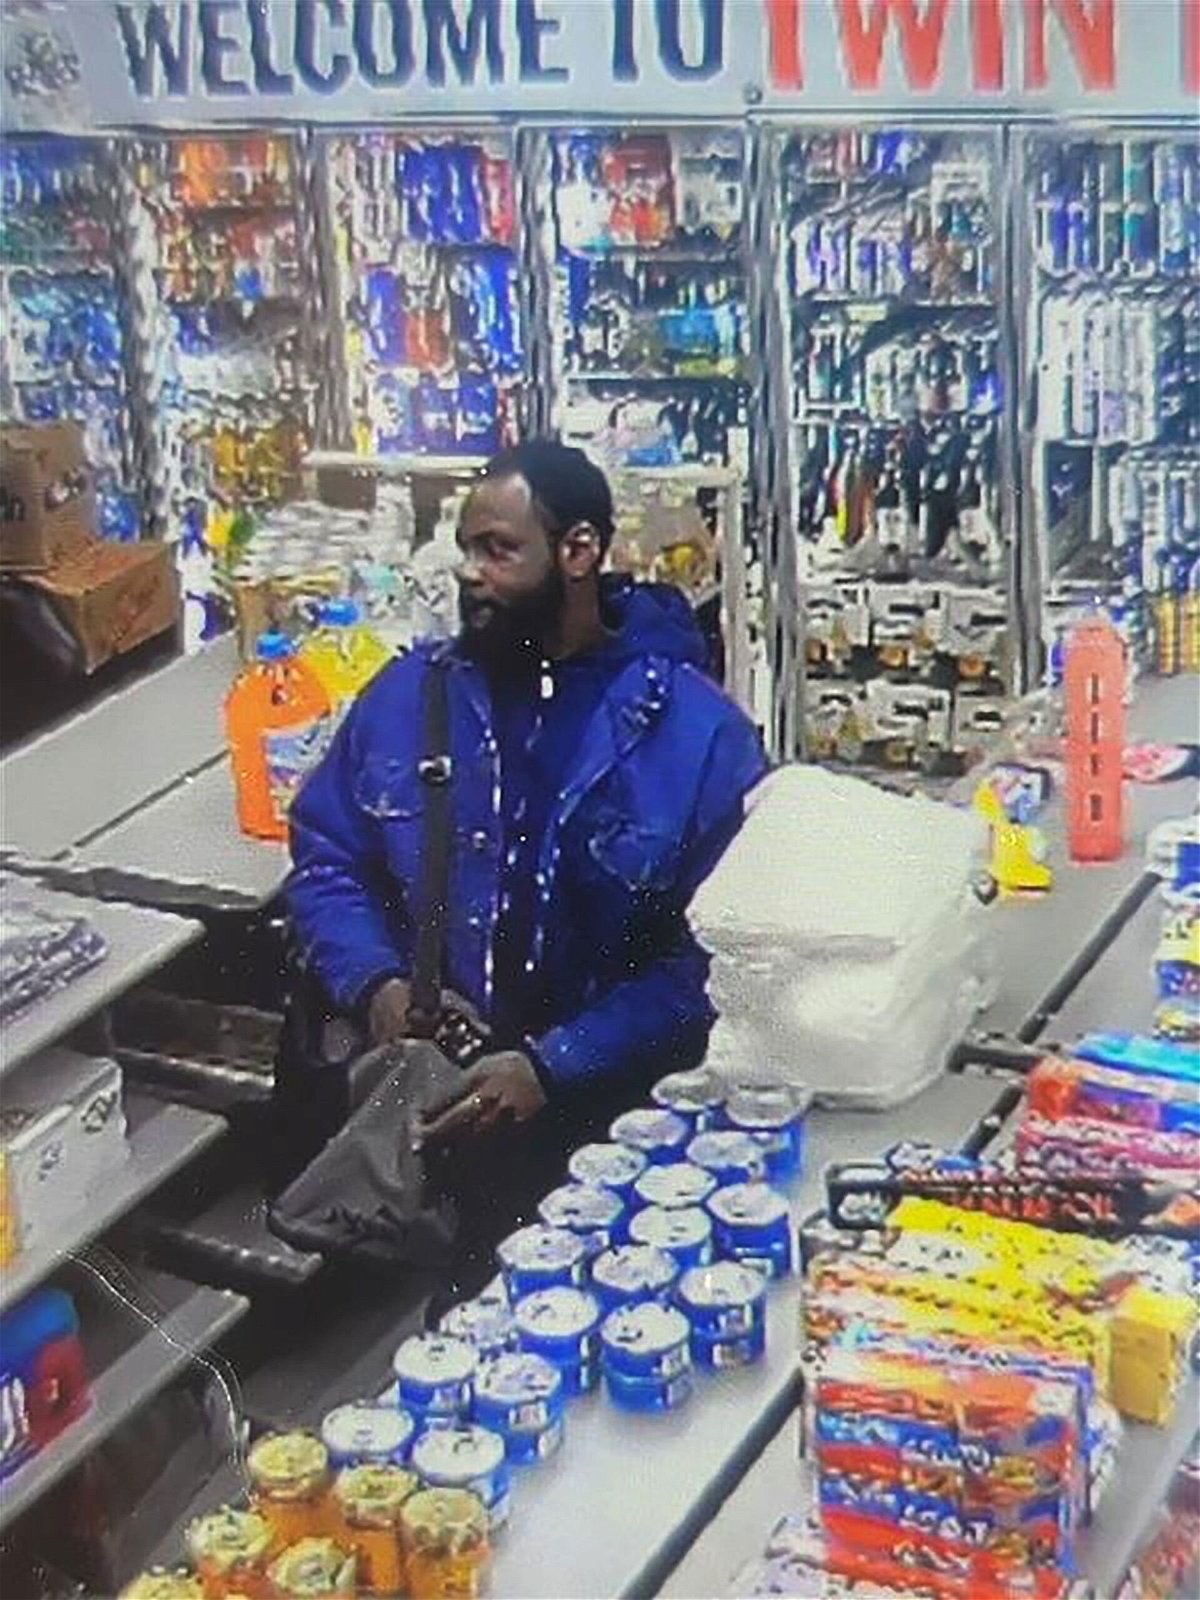 <i>City of Forest Park</i><br/>Shooting suspect Victor Demetrious Baymon is seen in surveillance video footage.